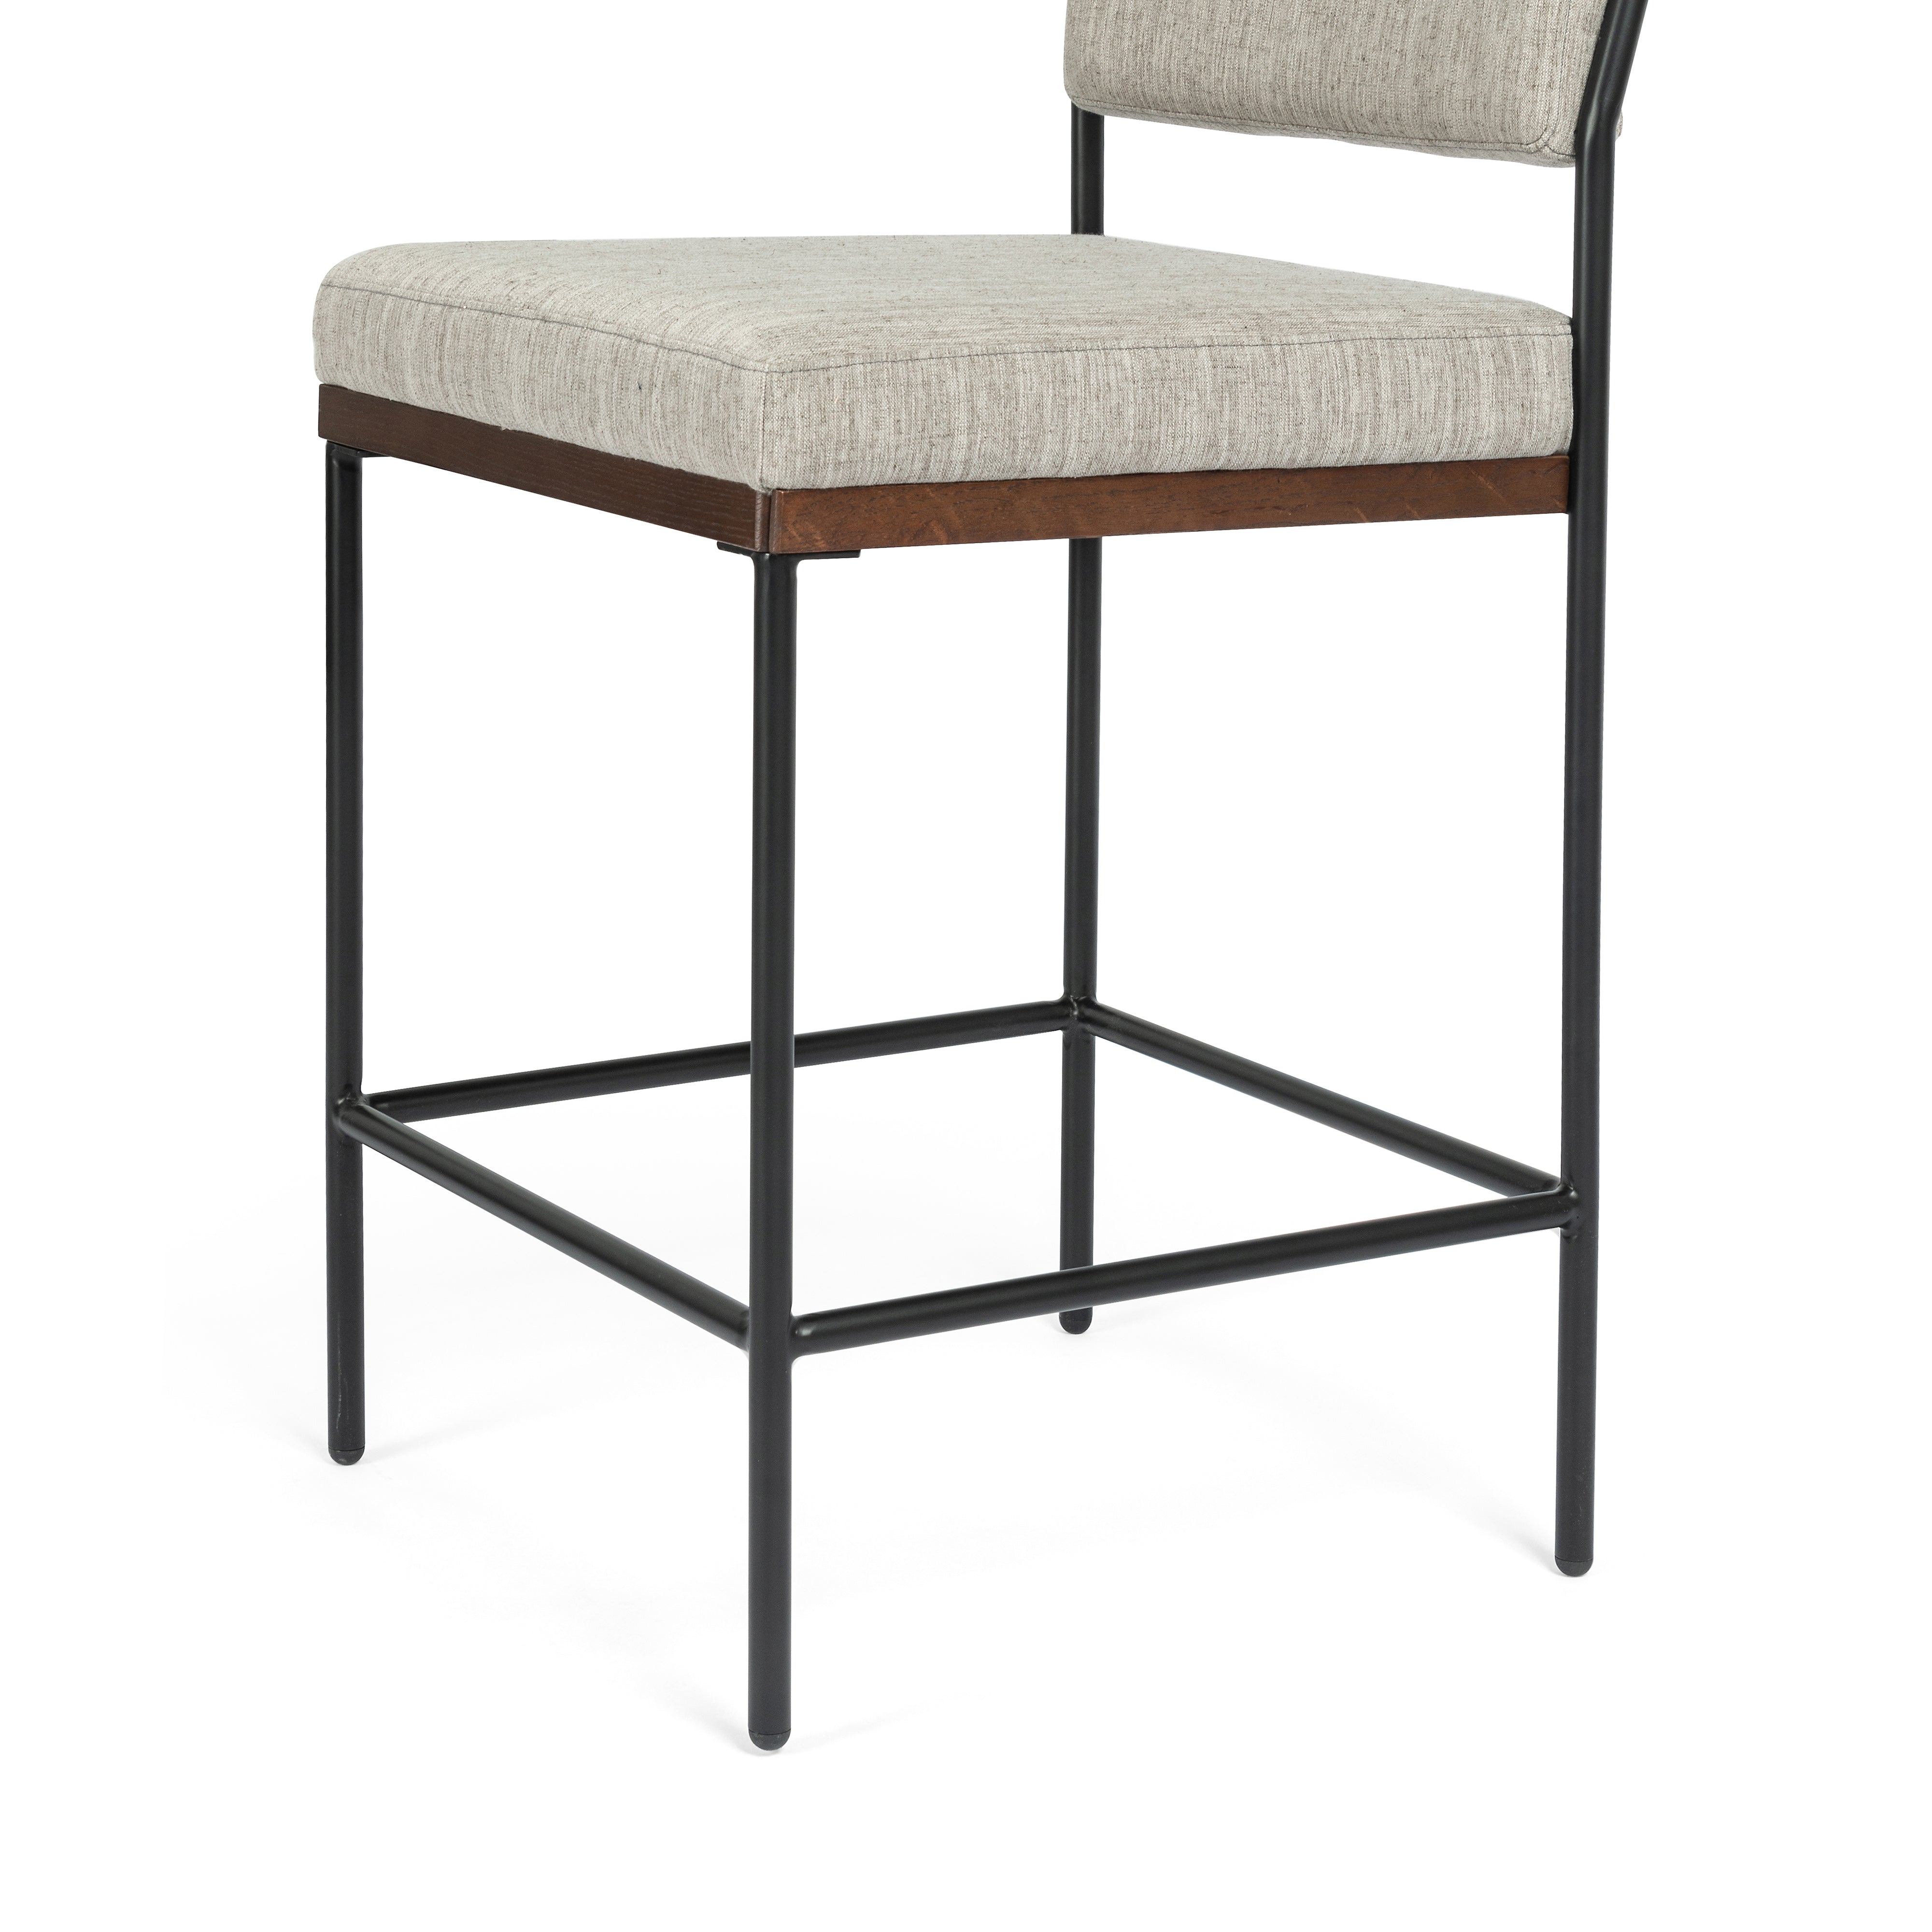 Savile Flannel Fabric and Almond Nettlewood with Midnight Iron (Counter Height) | Benton Bar/Counter Stool | Valley Ridge Furniture